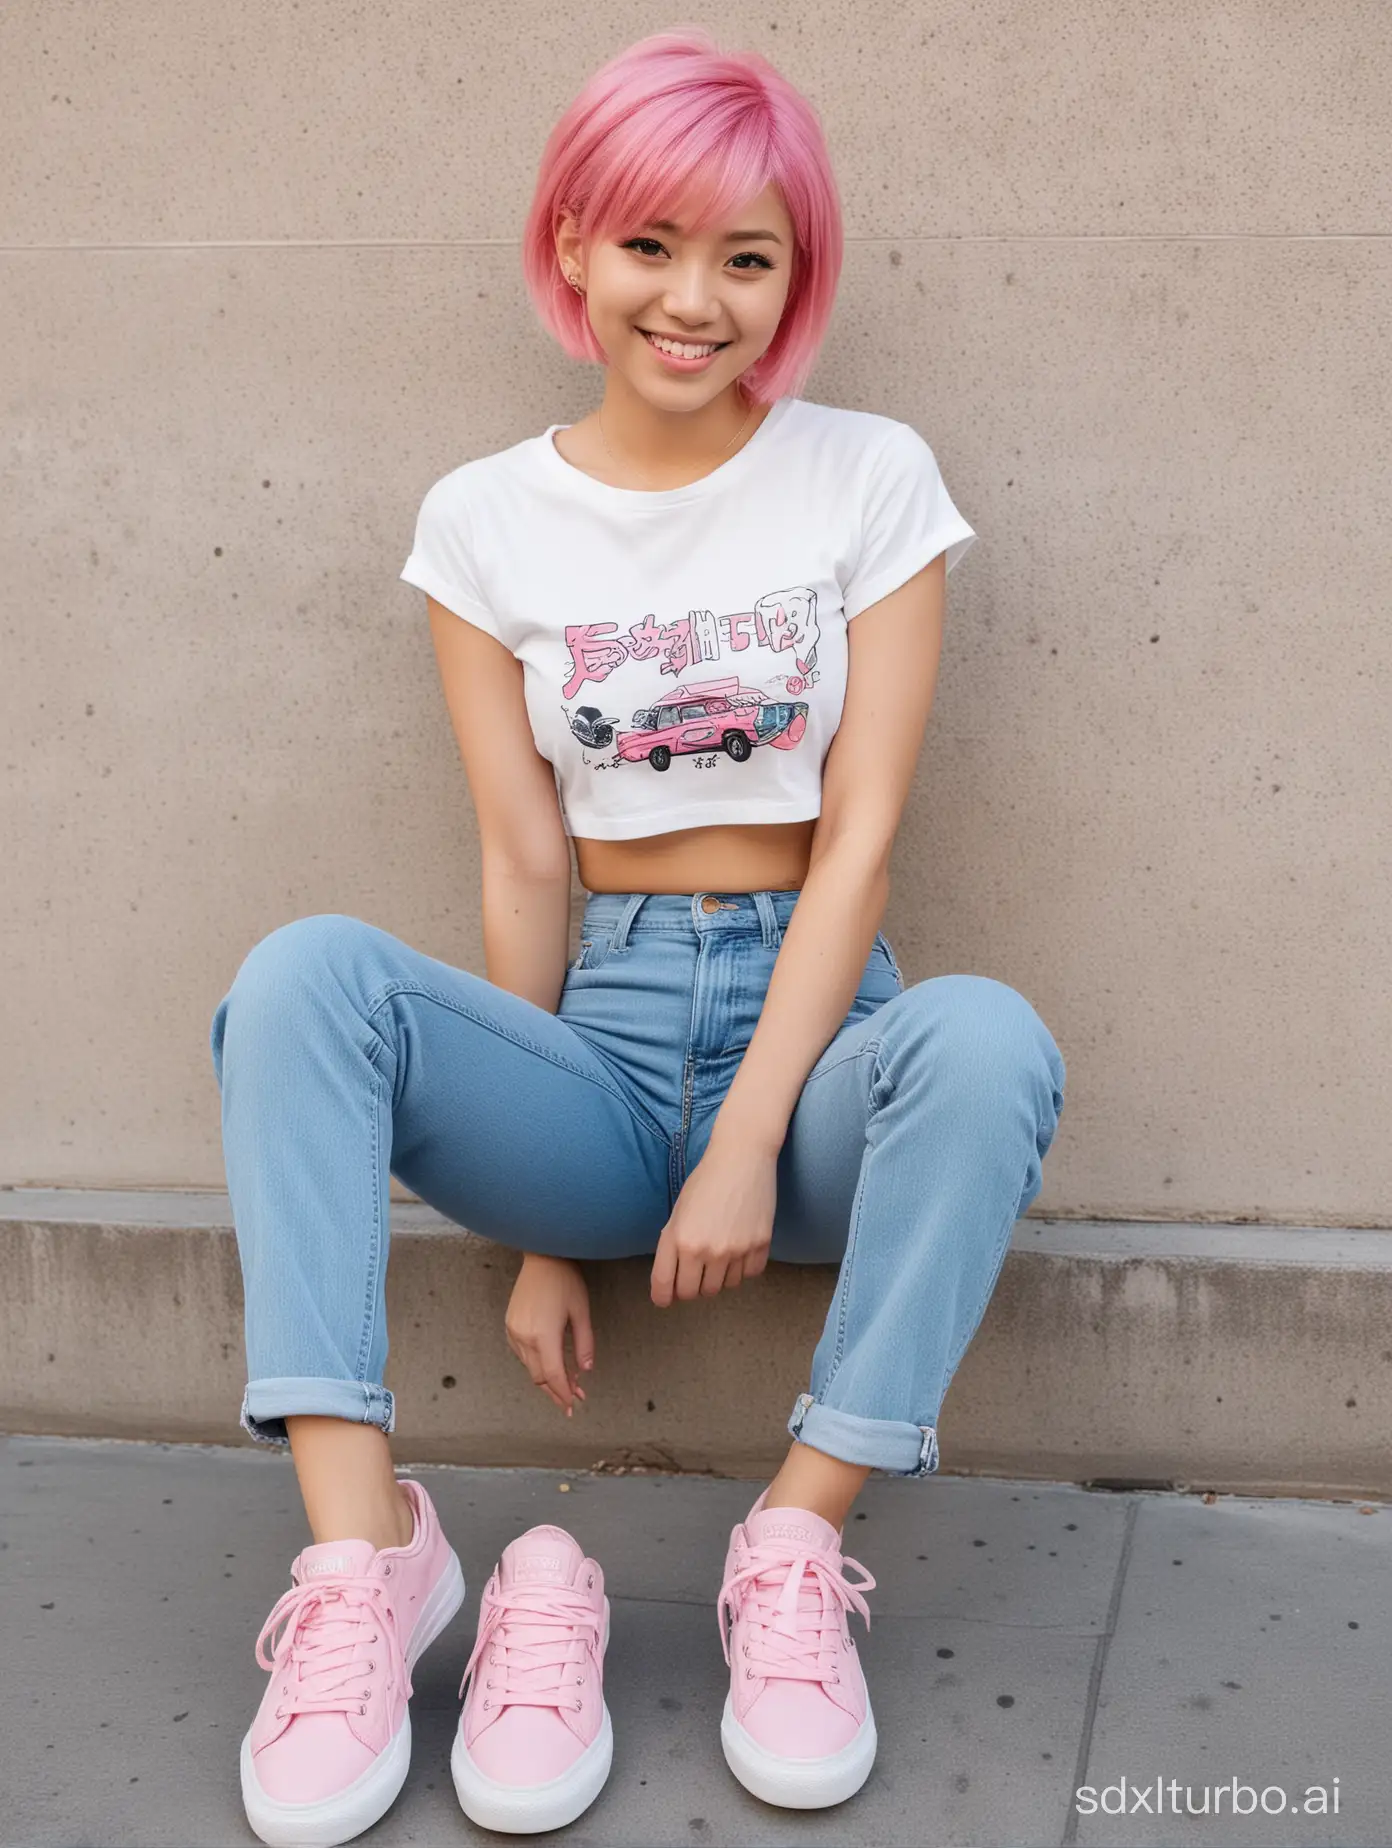 Japanese girl. flat chest. smiling. crop top. low rider jeans. canvas shoes. short pink hair. 